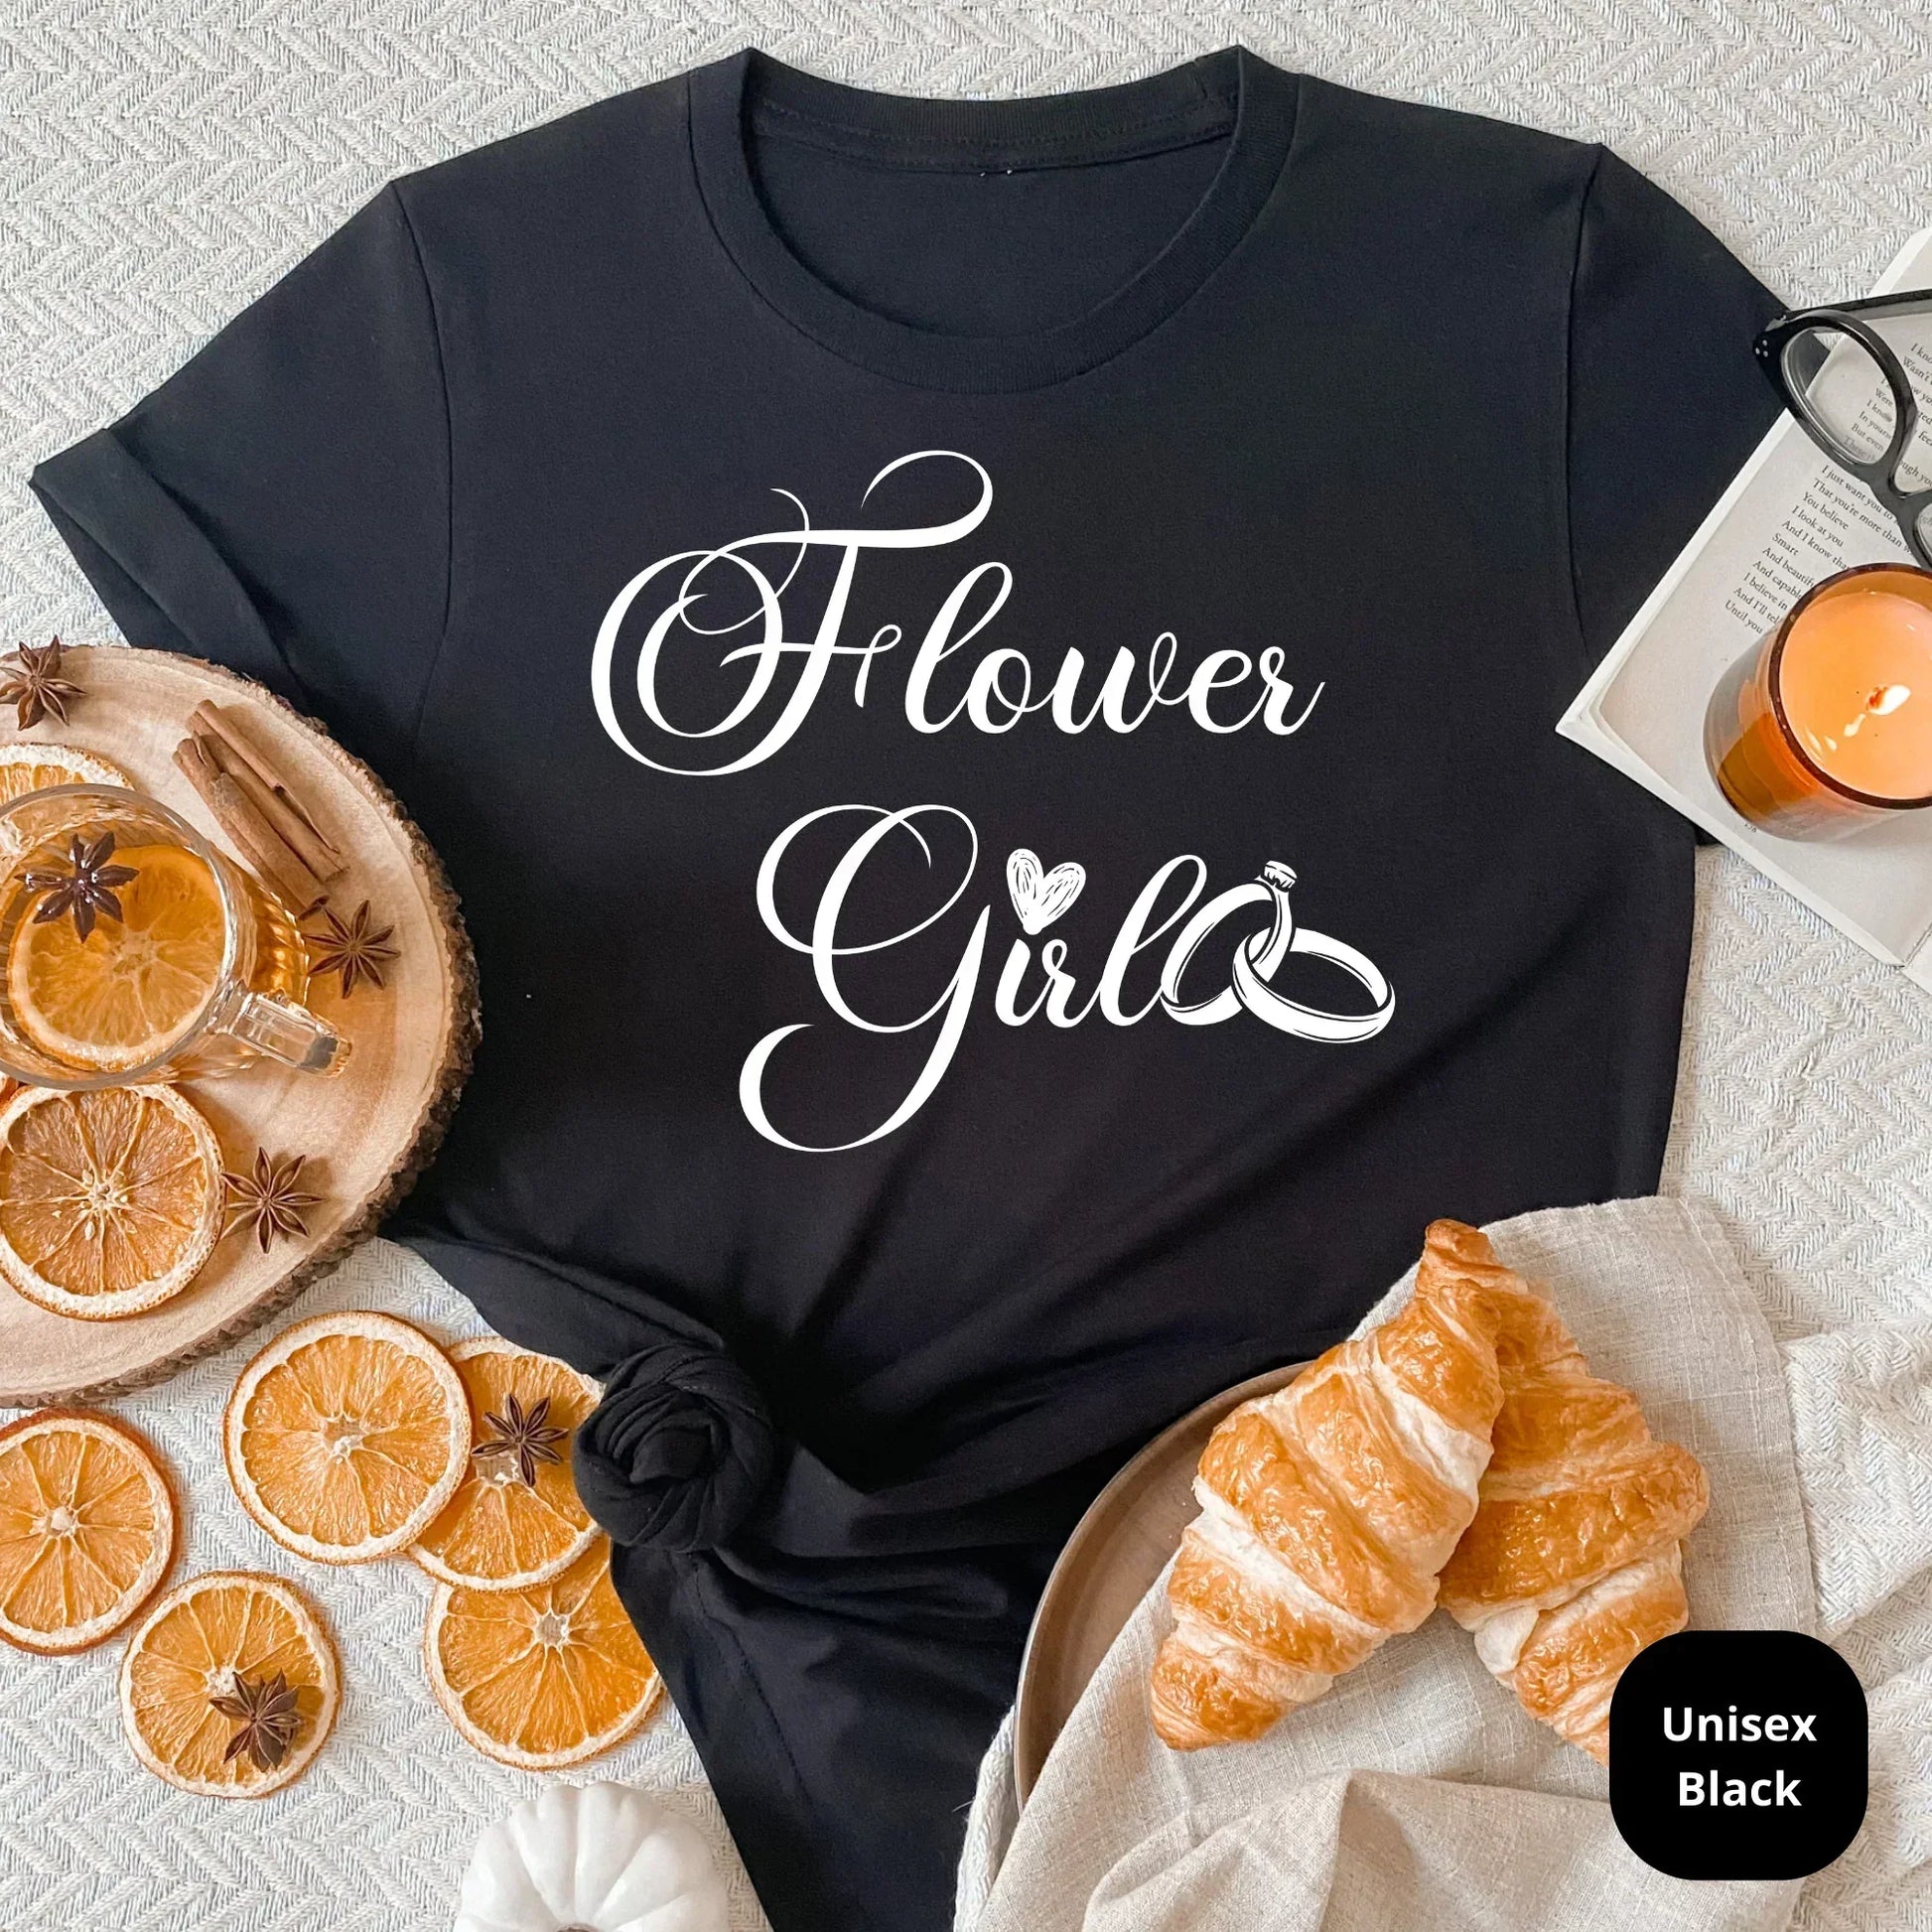 Bridal Party Shirts for Wedding Party HMDesignStudioUS